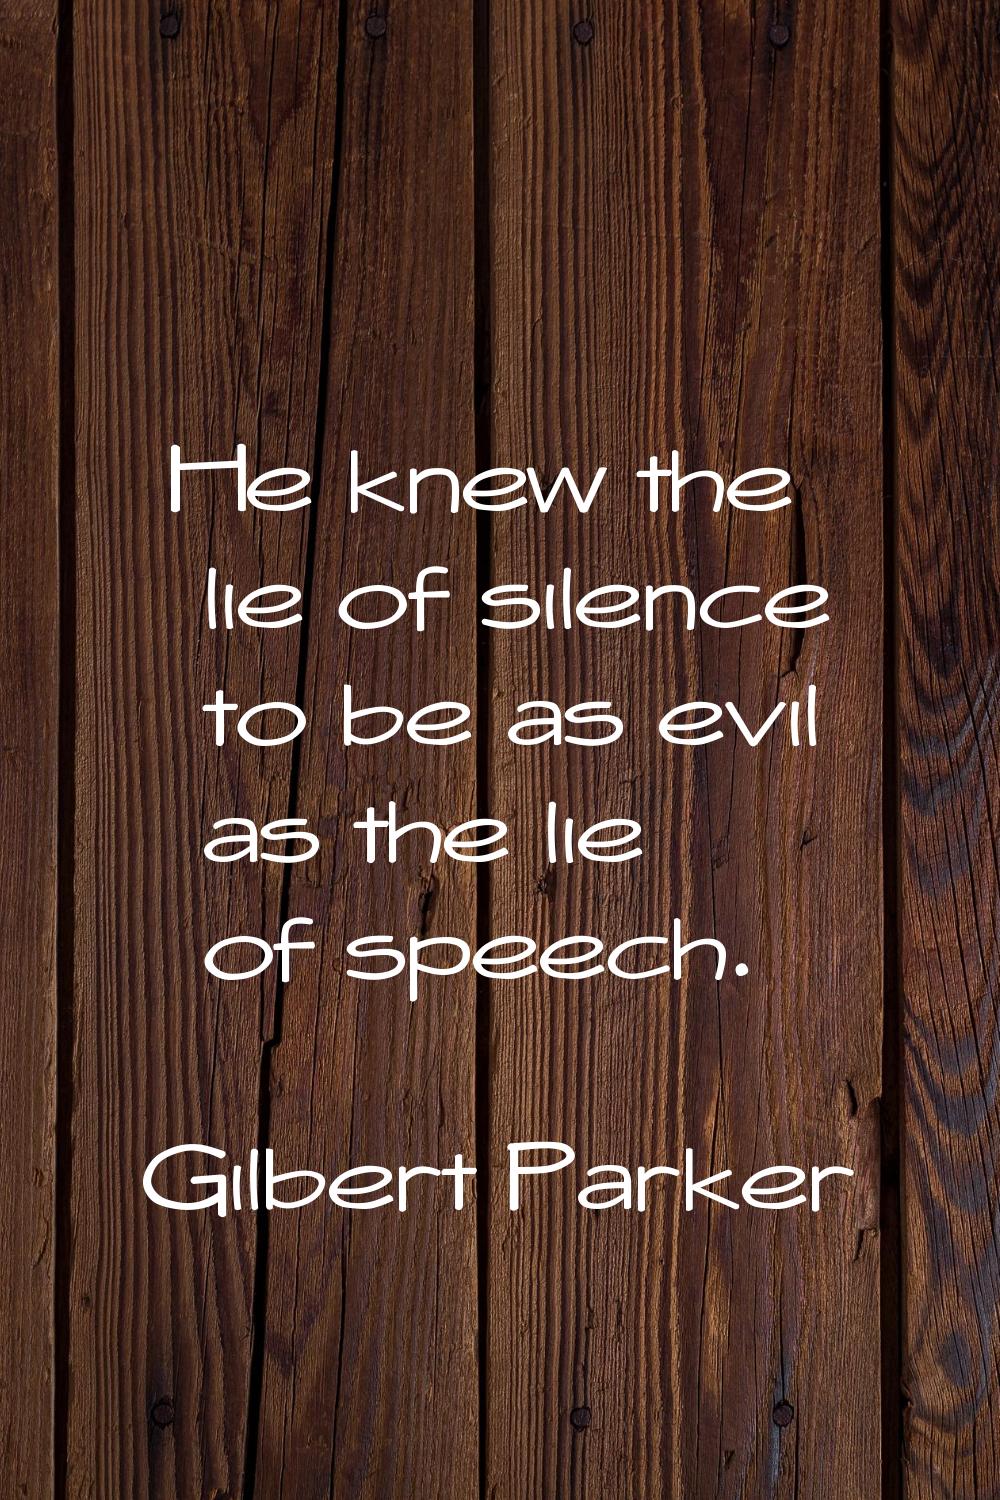 He knew the lie of silence to be as evil as the lie of speech.